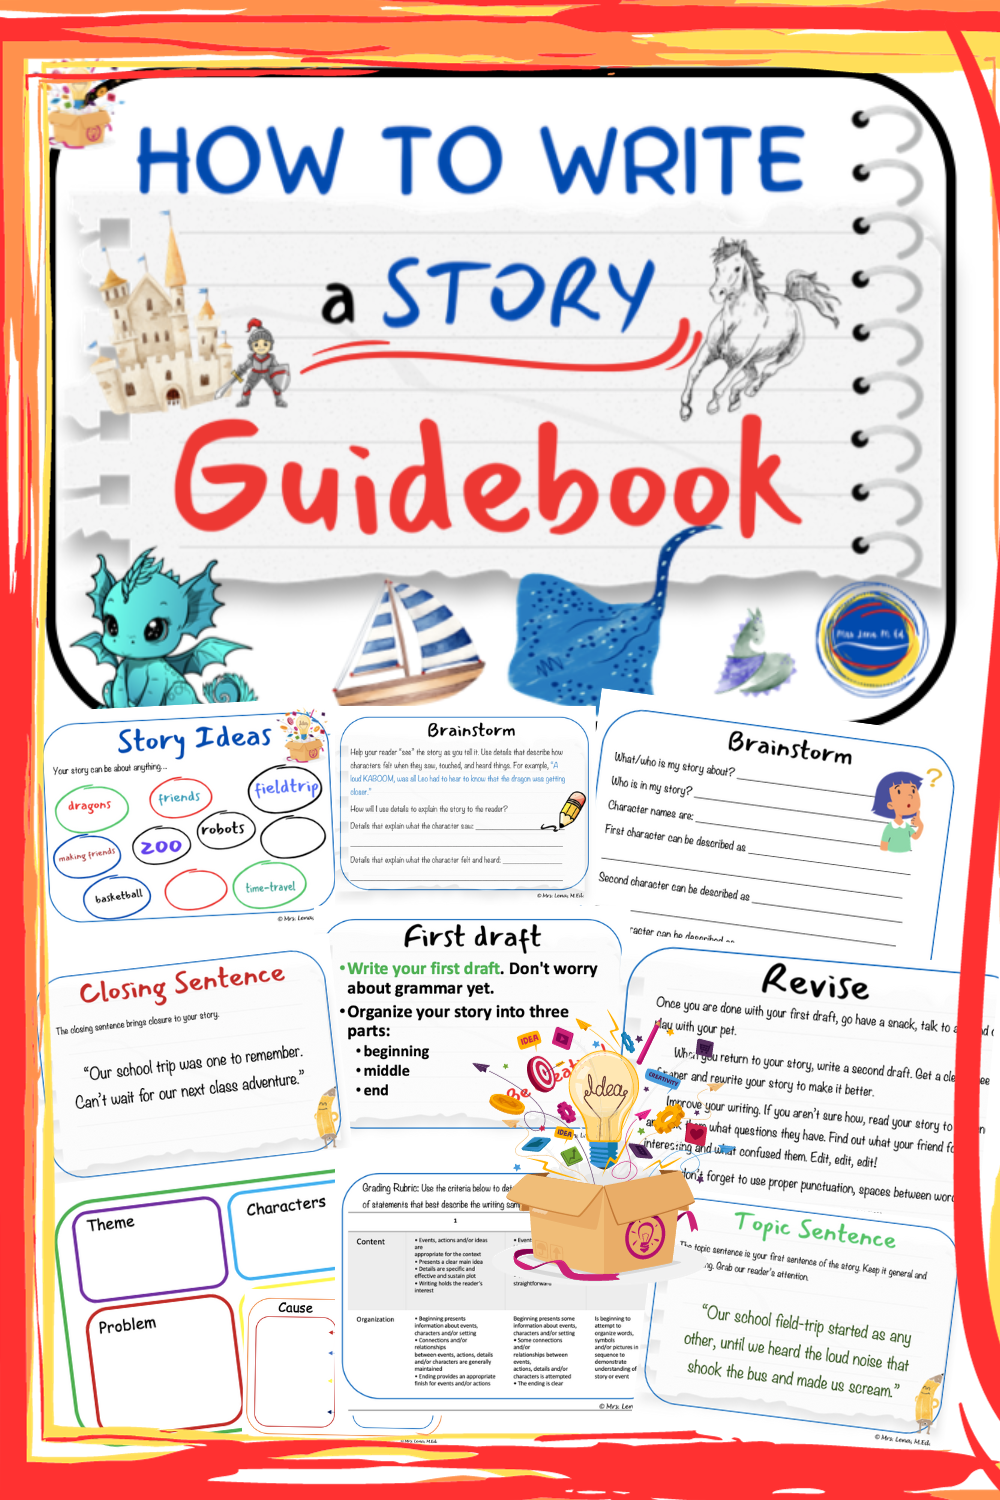 How To Write A Story Guidebook for Narrative Writing PRINT and GO!